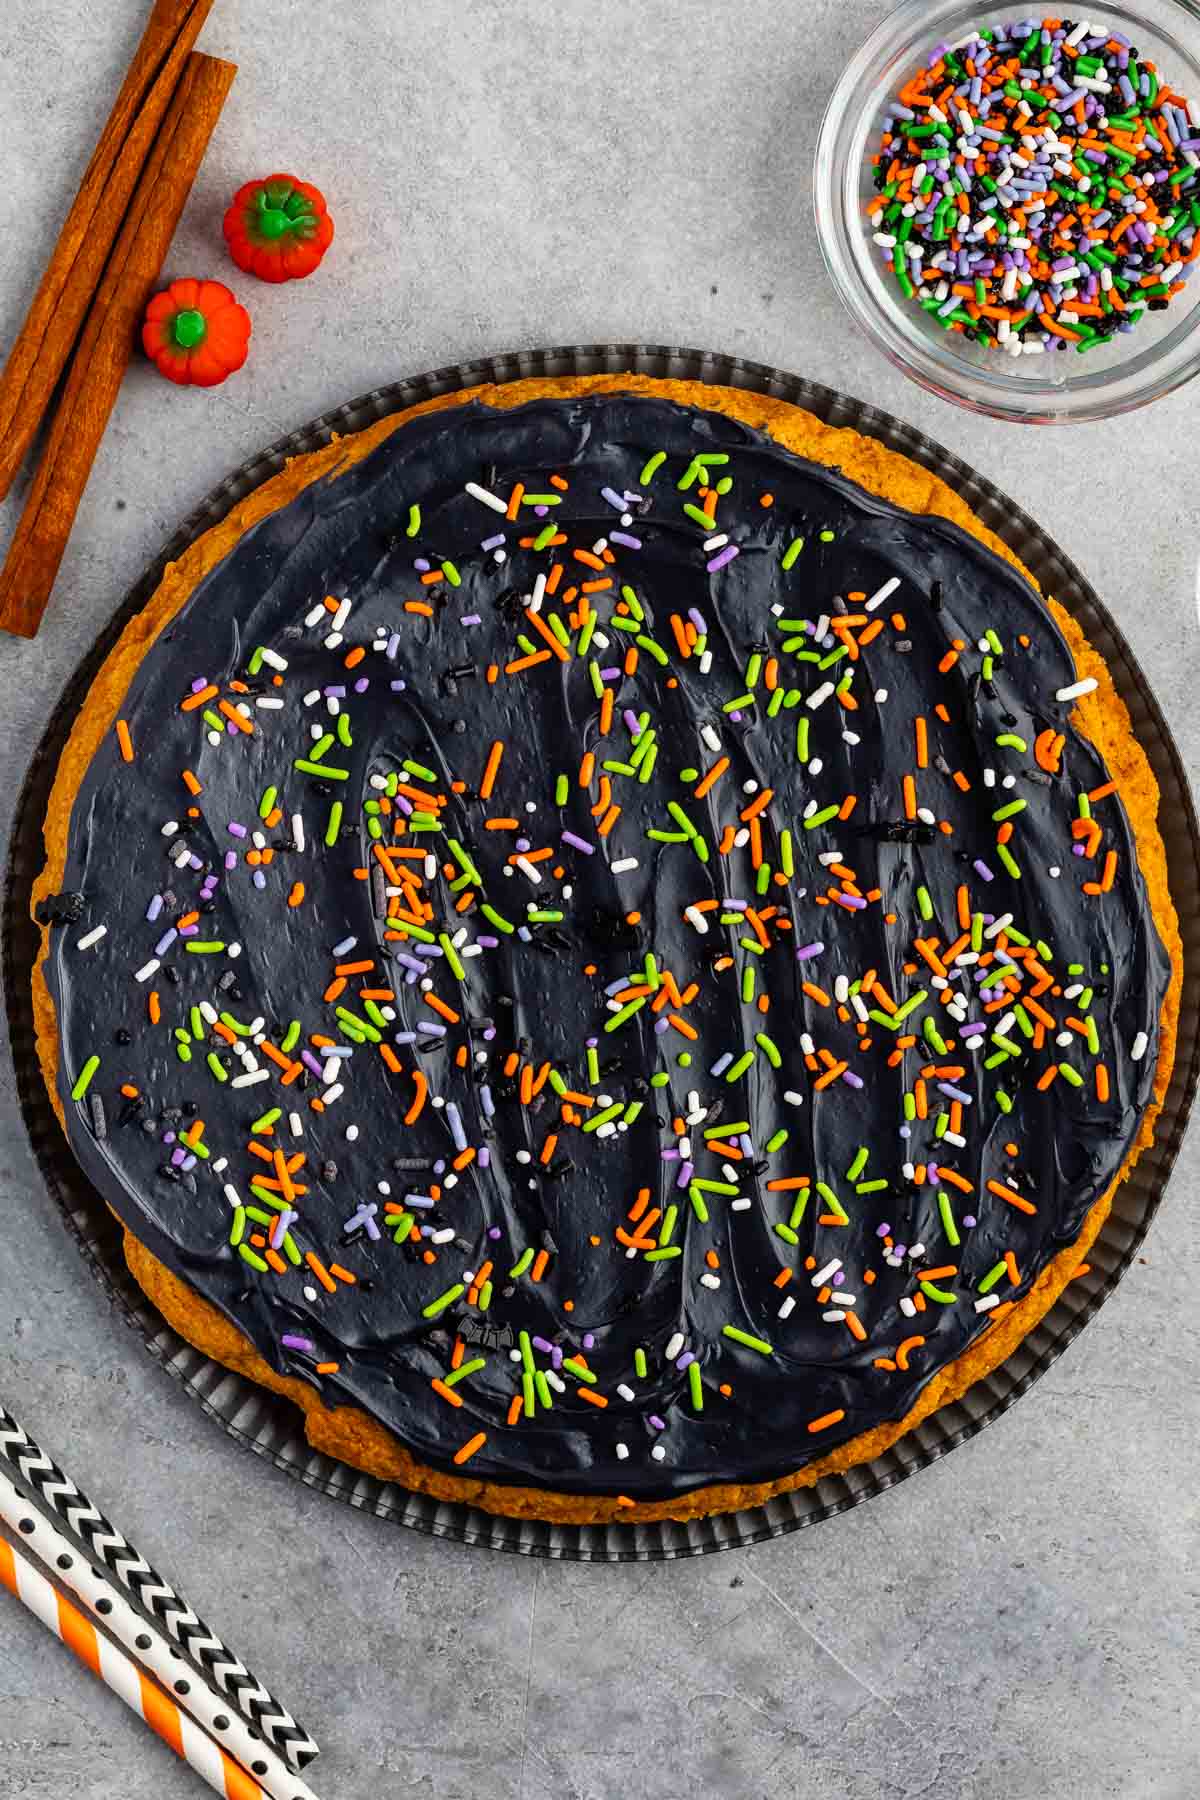 halloween pumpkin cookie cake with black frosting and sprinkles on top.